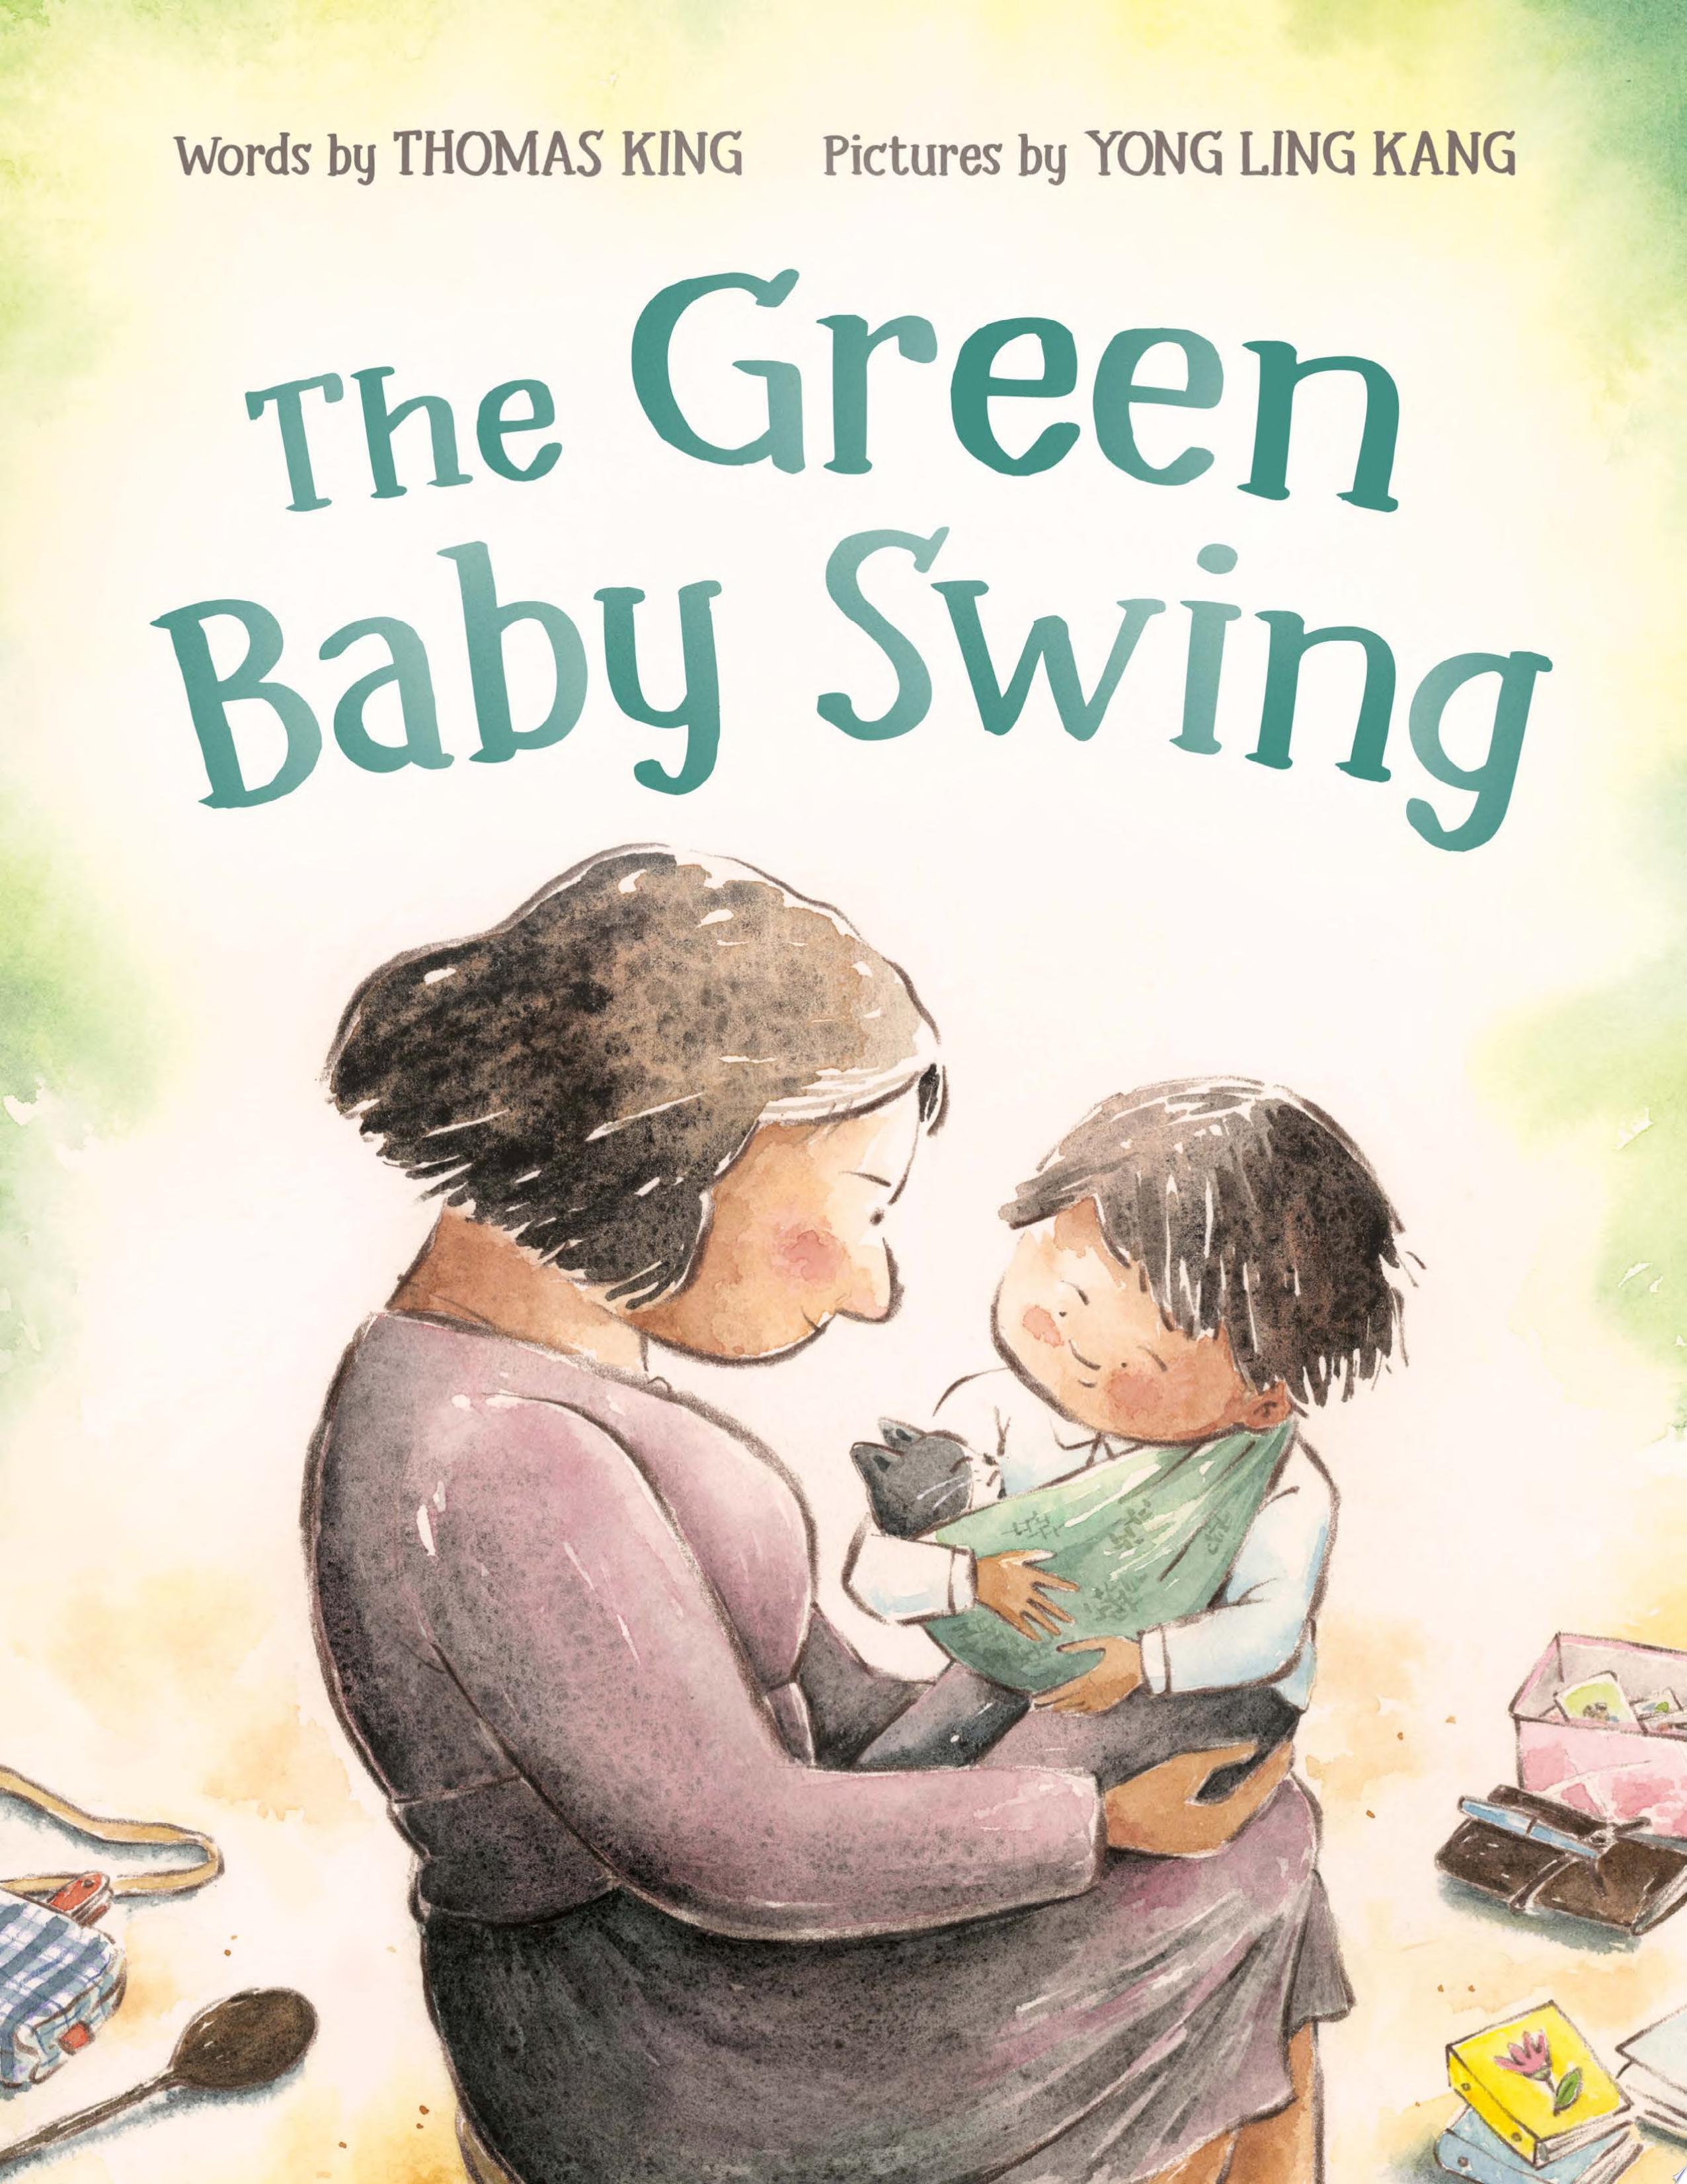 Image for "The Green Baby Swing"